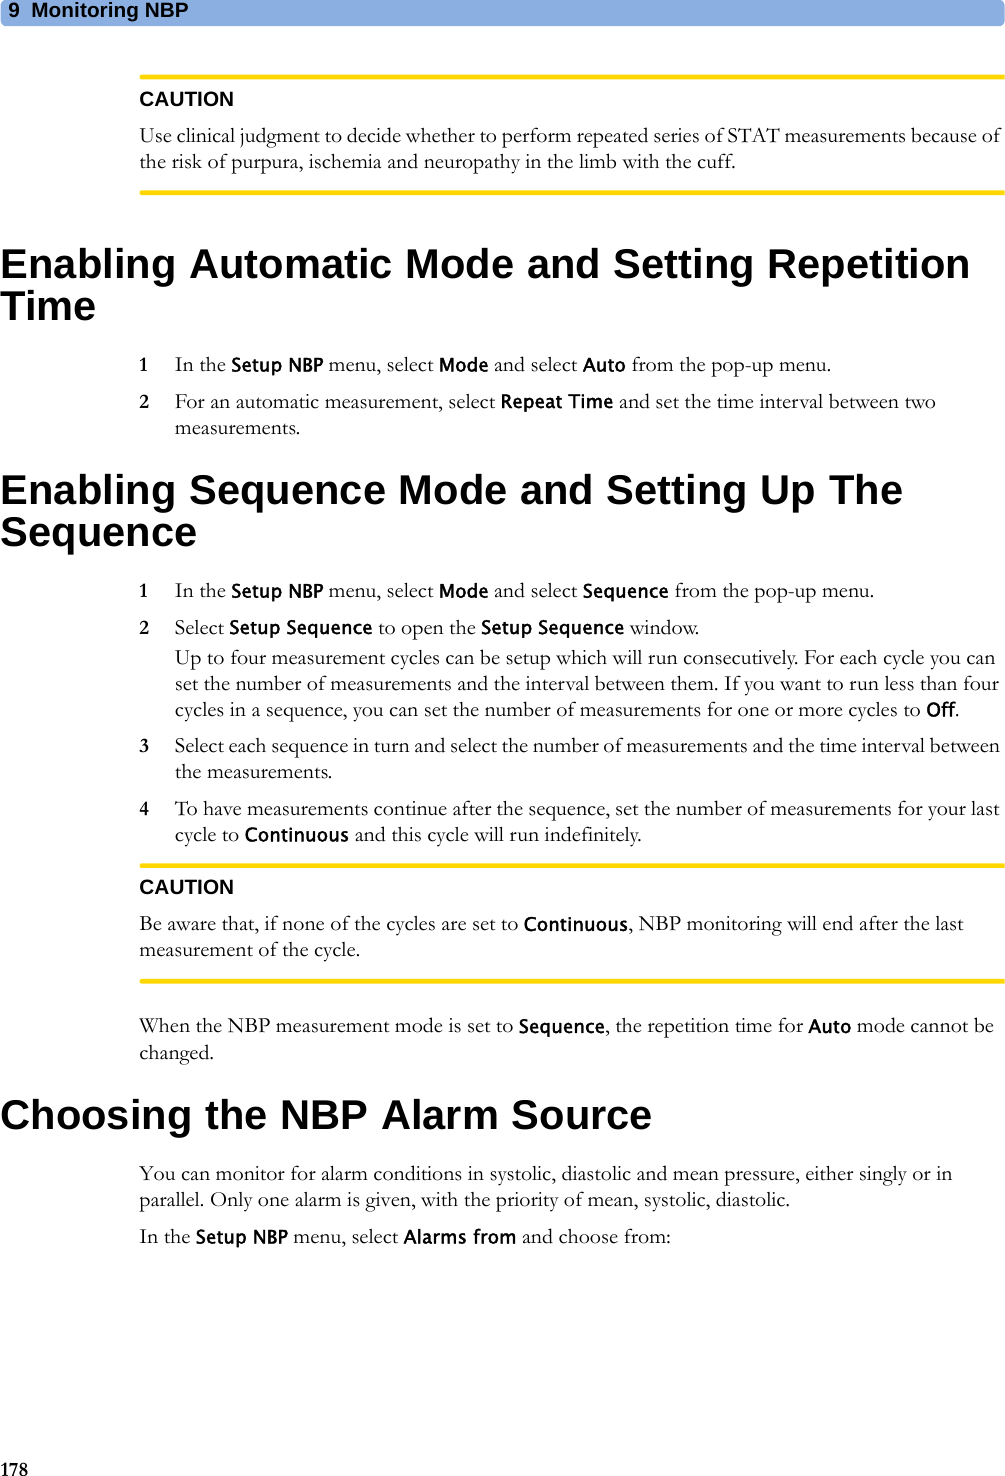 9 Monitoring NBP178CAUTIONUse clinical judgment to decide whether to perform repeated series of STAT measurements because of the risk of purpura, ischemia and neuropathy in the limb with the cuff.Enabling Automatic Mode and Setting Repetition Time1In the Setup NBP menu, select Mode and select Auto from the pop-up menu.2For an automatic measurement, select Repeat Time and set the time interval between two measurements.Enabling Sequence Mode and Setting Up The Sequence1In the Setup NBP menu, select Mode and select Sequence from the pop-up menu.2Select Setup Sequence to open the Setup Sequence window.Up to four measurement cycles can be setup which will run consecutively. For each cycle you can set the number of measurements and the interval between them. If you want to run less than four cycles in a sequence, you can set the number of measurements for one or more cycles to Off.3Select each sequence in turn and select the number of measurements and the time interval between the measurements.4To have measurements continue after the sequence, set the number of measurements for your last cycle to Continuous and this cycle will run indefinitely.CAUTIONBe aware that, if none of the cycles are set to Continuous, NBP monitoring will end after the last measurement of the cycle.When the NBP measurement mode is set to Sequence, the repetition time for Auto mode cannot be changed.Choosing the NBP Alarm SourceYou can monitor for alarm conditions in systolic, diastolic and mean pressure, either singly or in parallel. Only one alarm is given, with the priority of mean, systolic, diastolic.In the Setup NBP menu, select Alarms from and choose from: